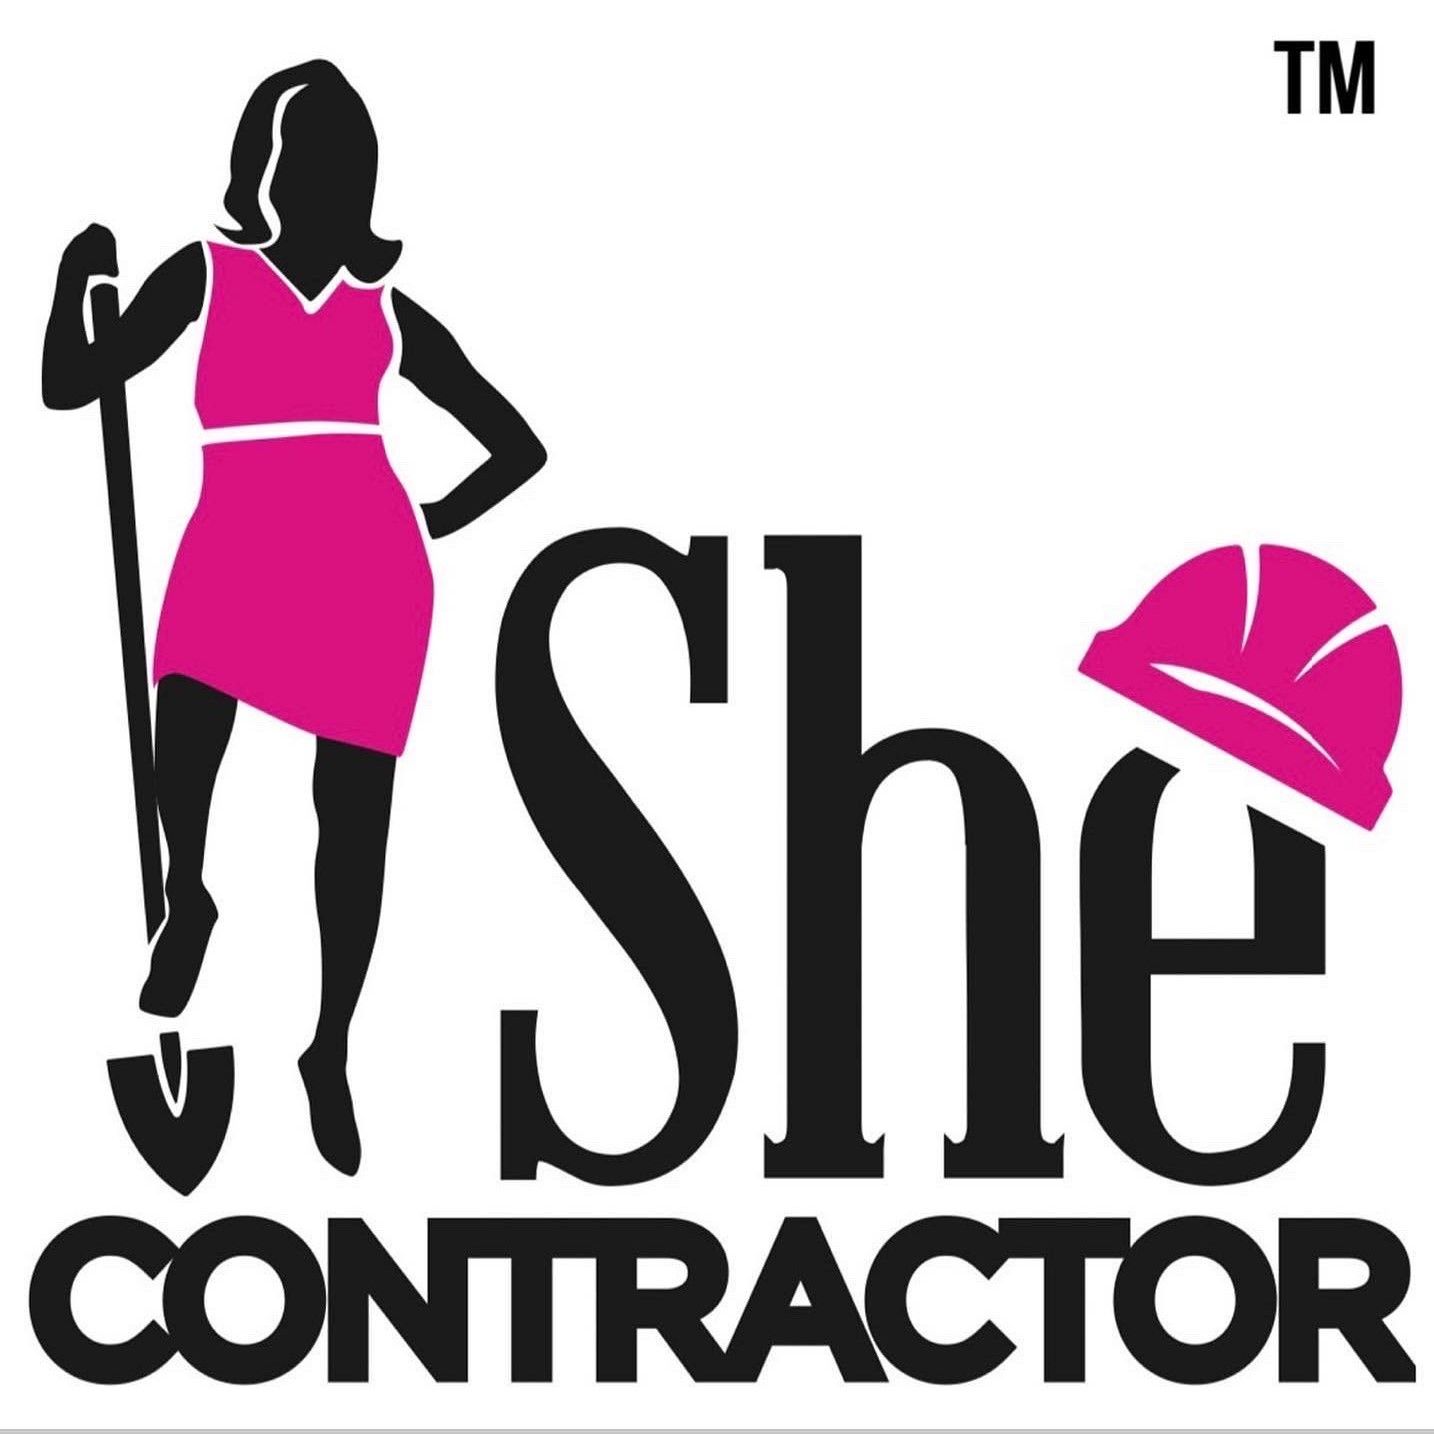 She Contractor